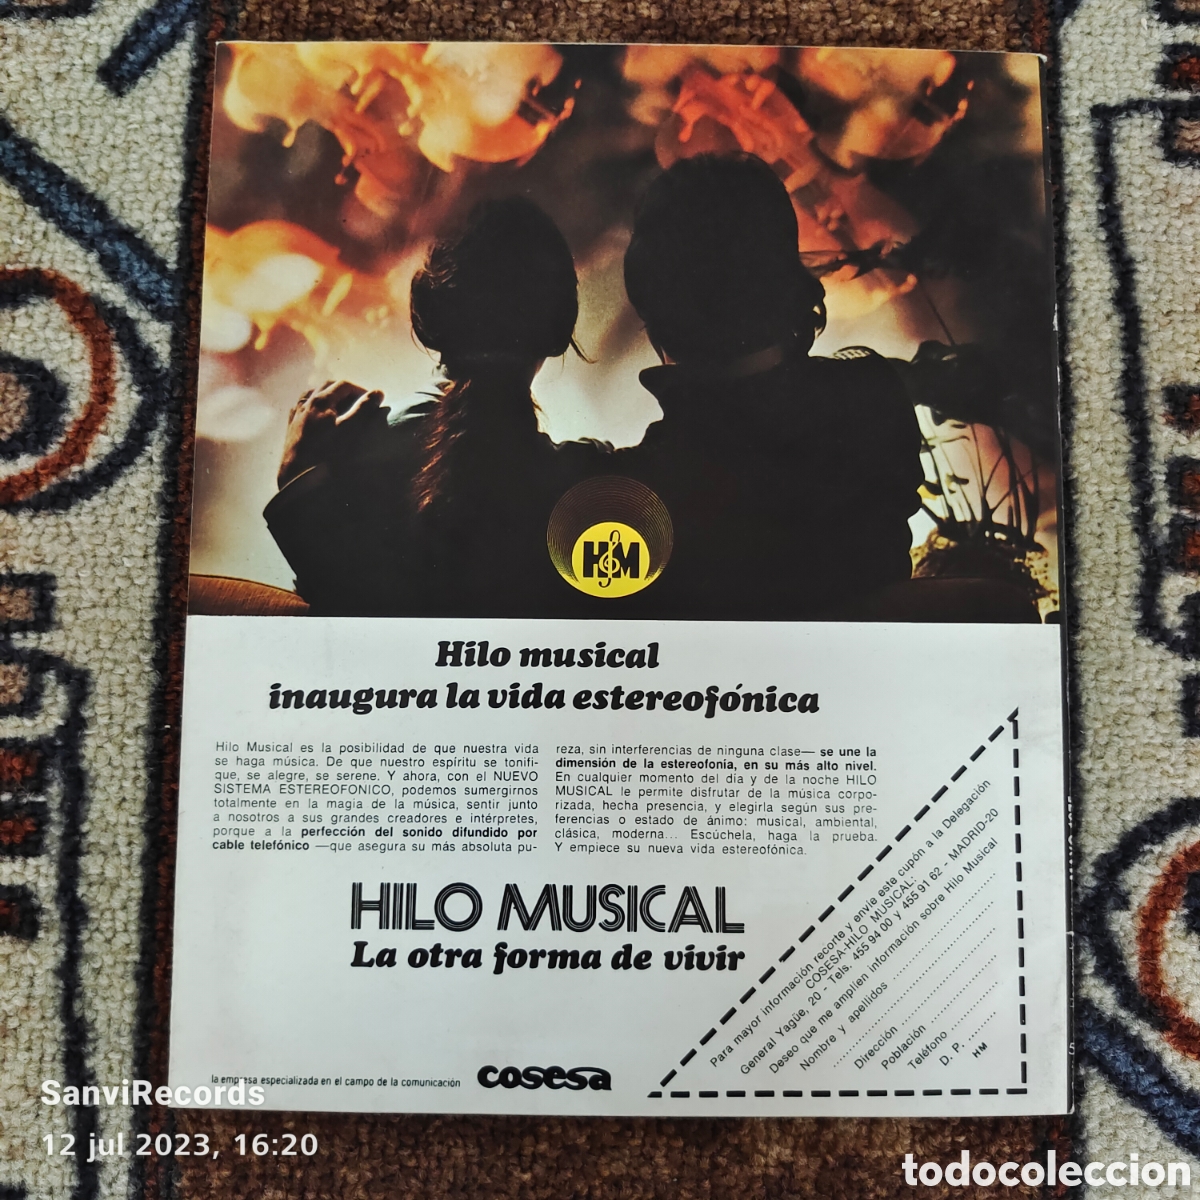 Hilo musical sin cables